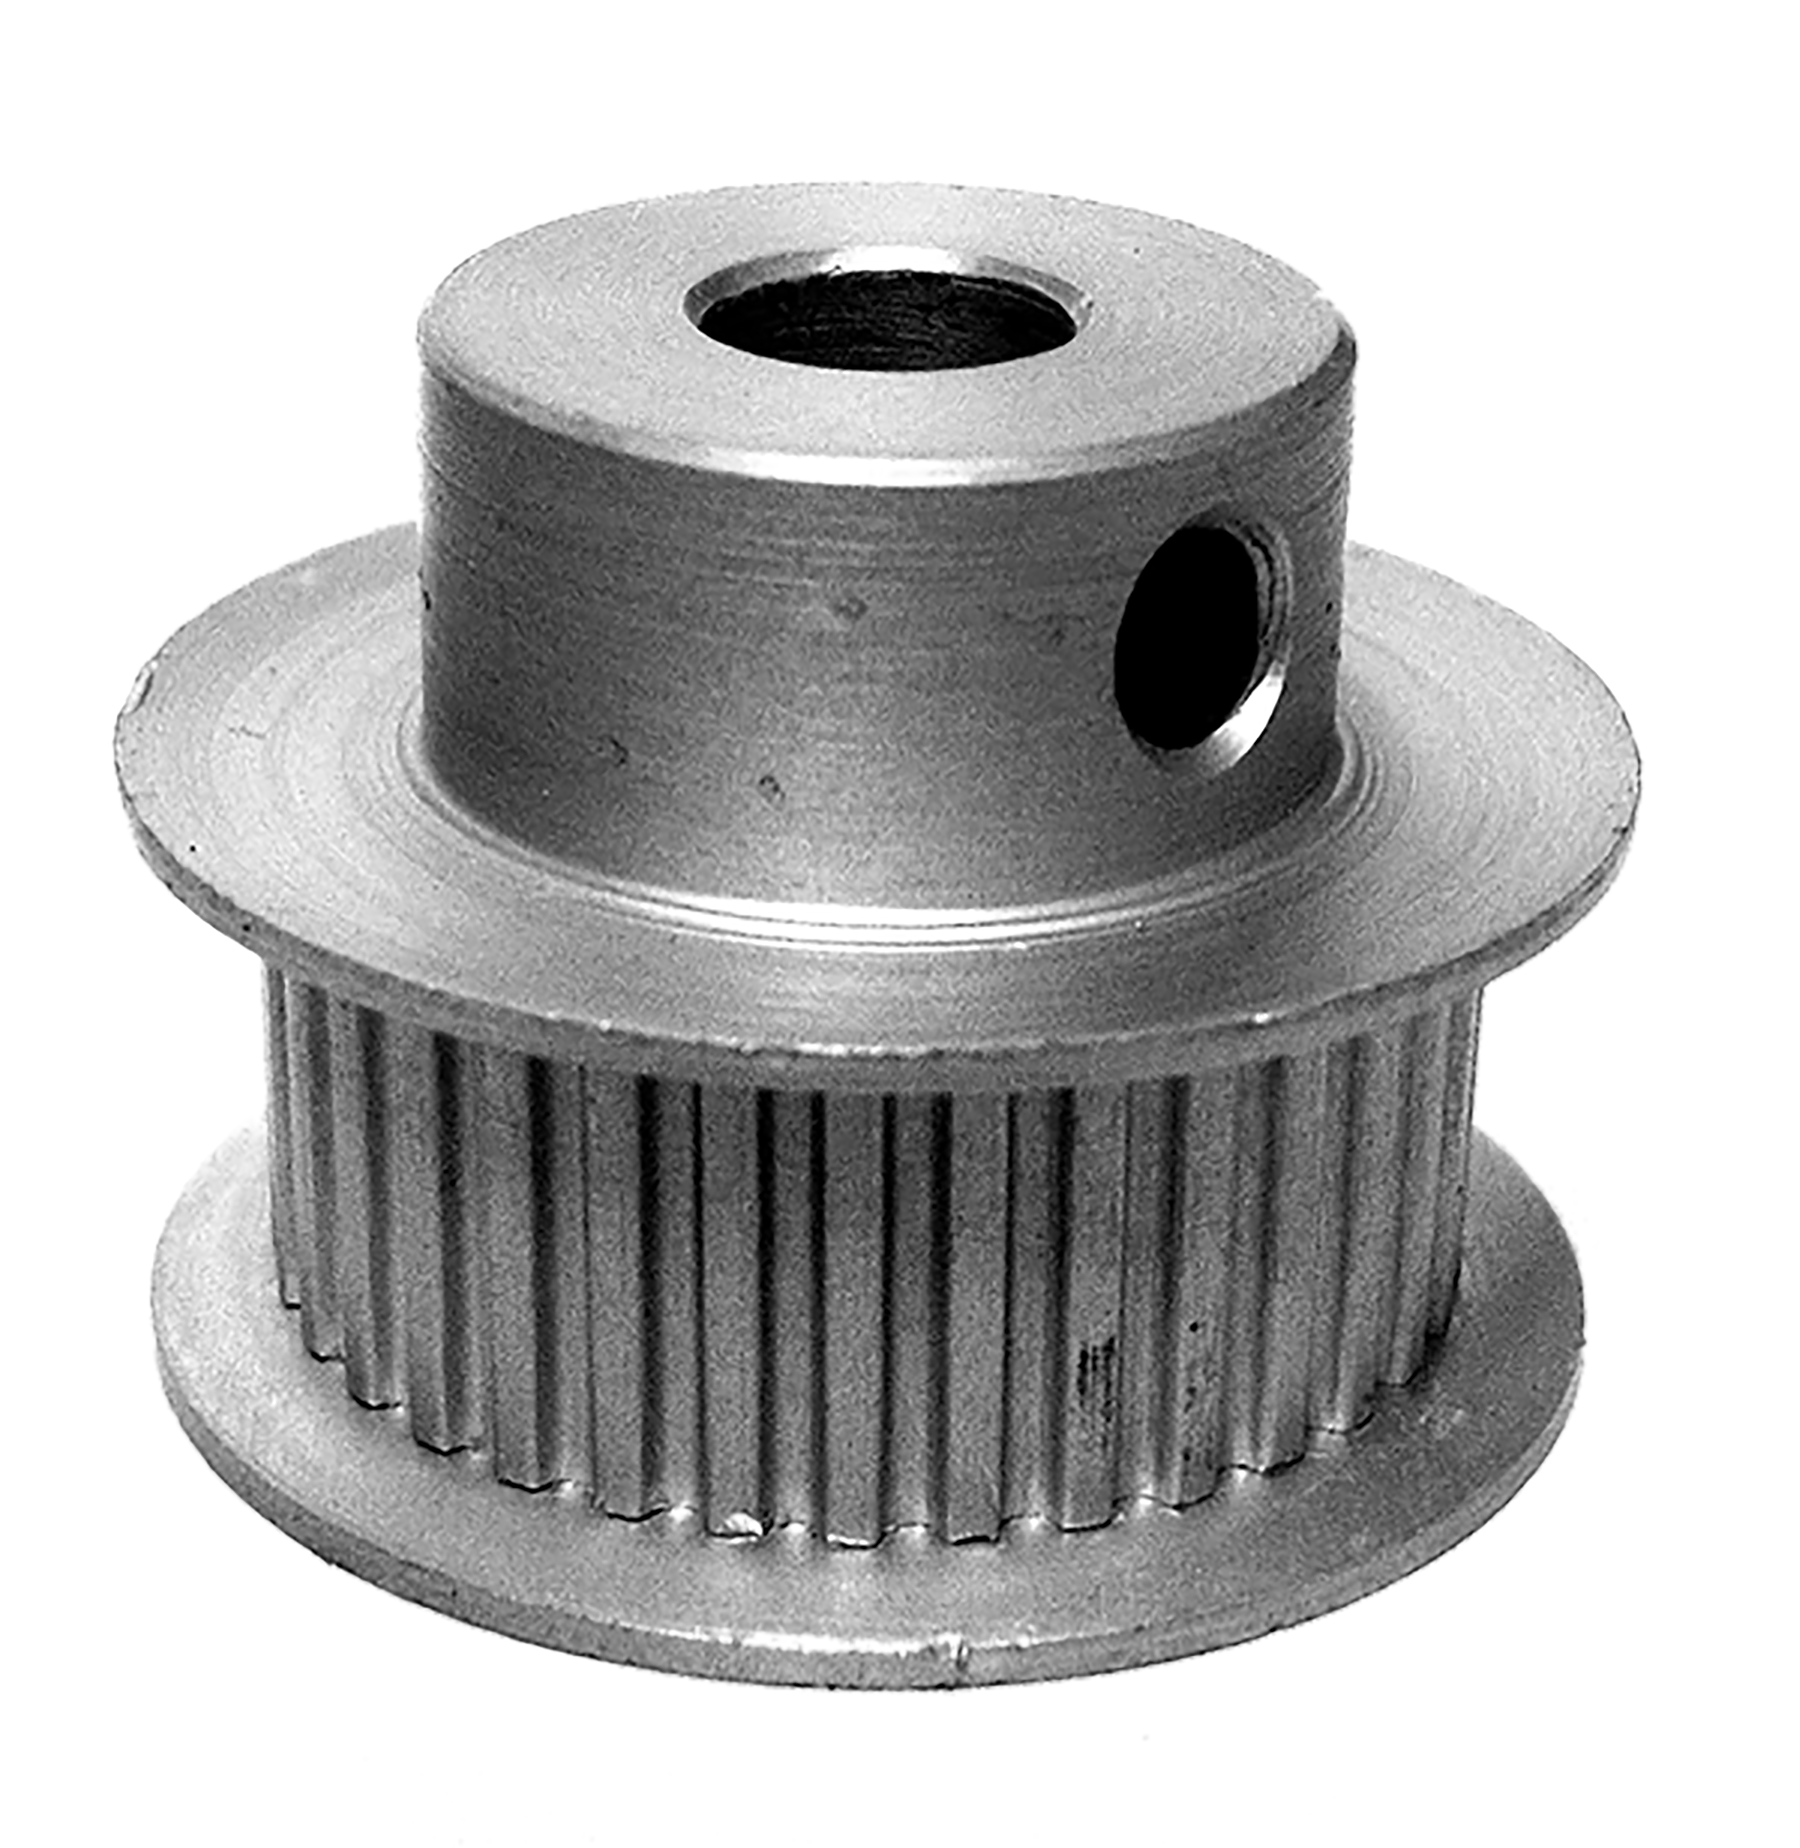 48LT312-6FA3 - Aluminum Imperial Pitch Pulleys